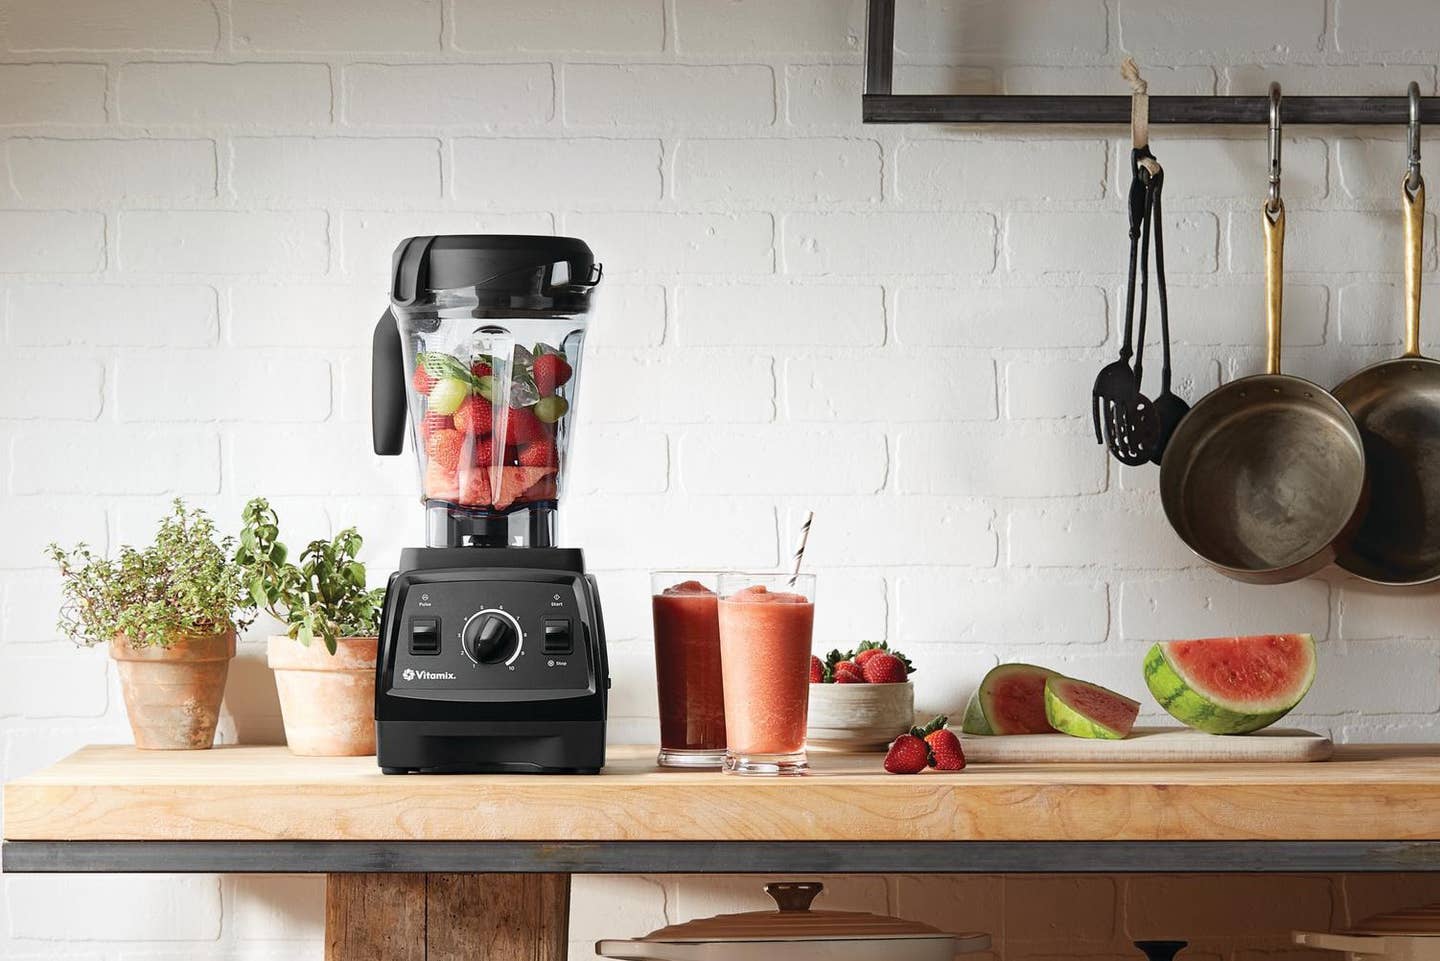 The Best Vitamix Blenders Make Impeccable Purees